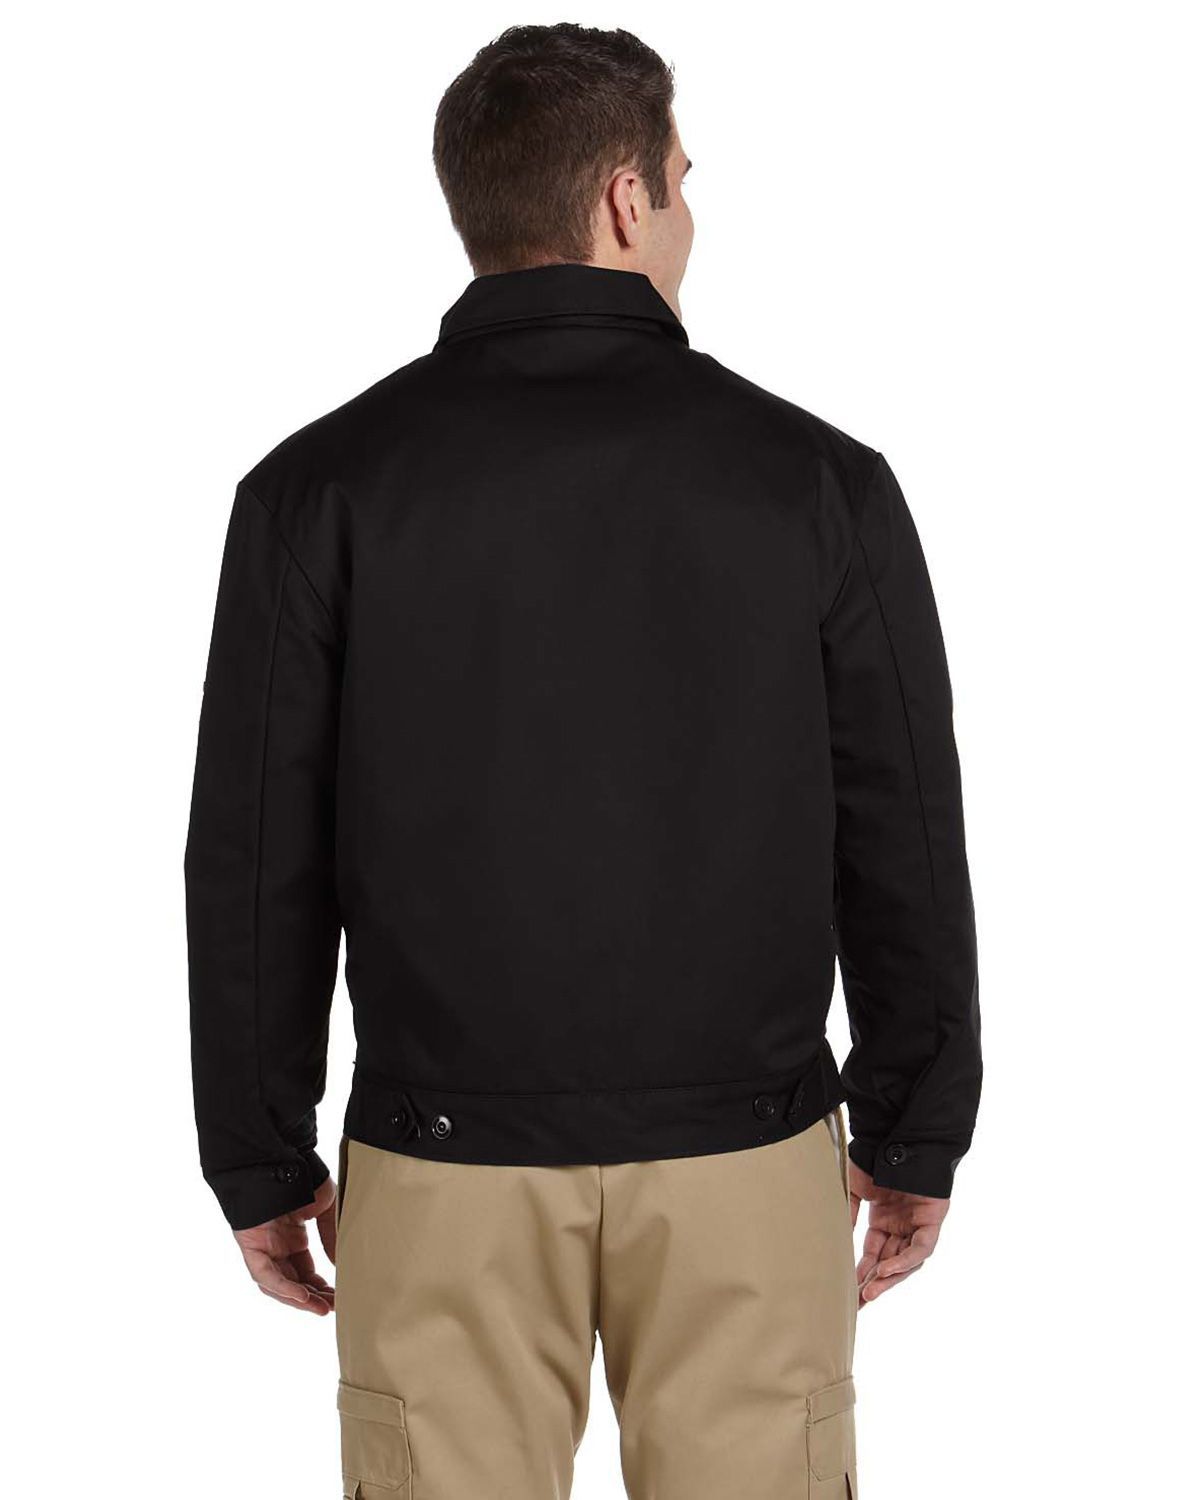 Dickies JT15 Lined Eisenhower Jacket - Shop at ApparelnBags.com